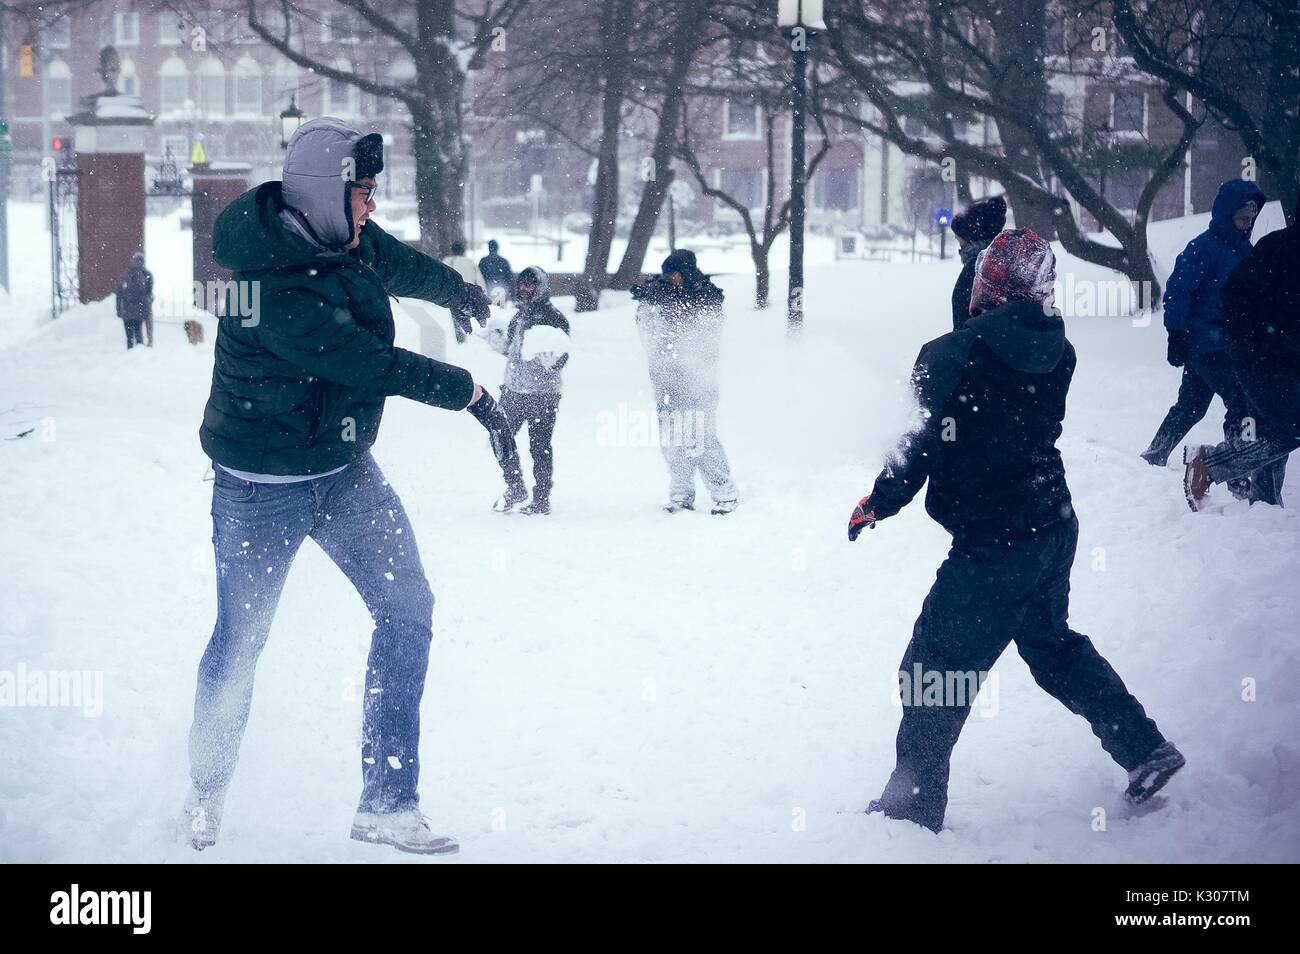 Students get hit by snowballs as others run and play during a massive snowball fight on a snow day at Johns Hopkins University, Baltimore, Maryland, 2016. Stock Photo